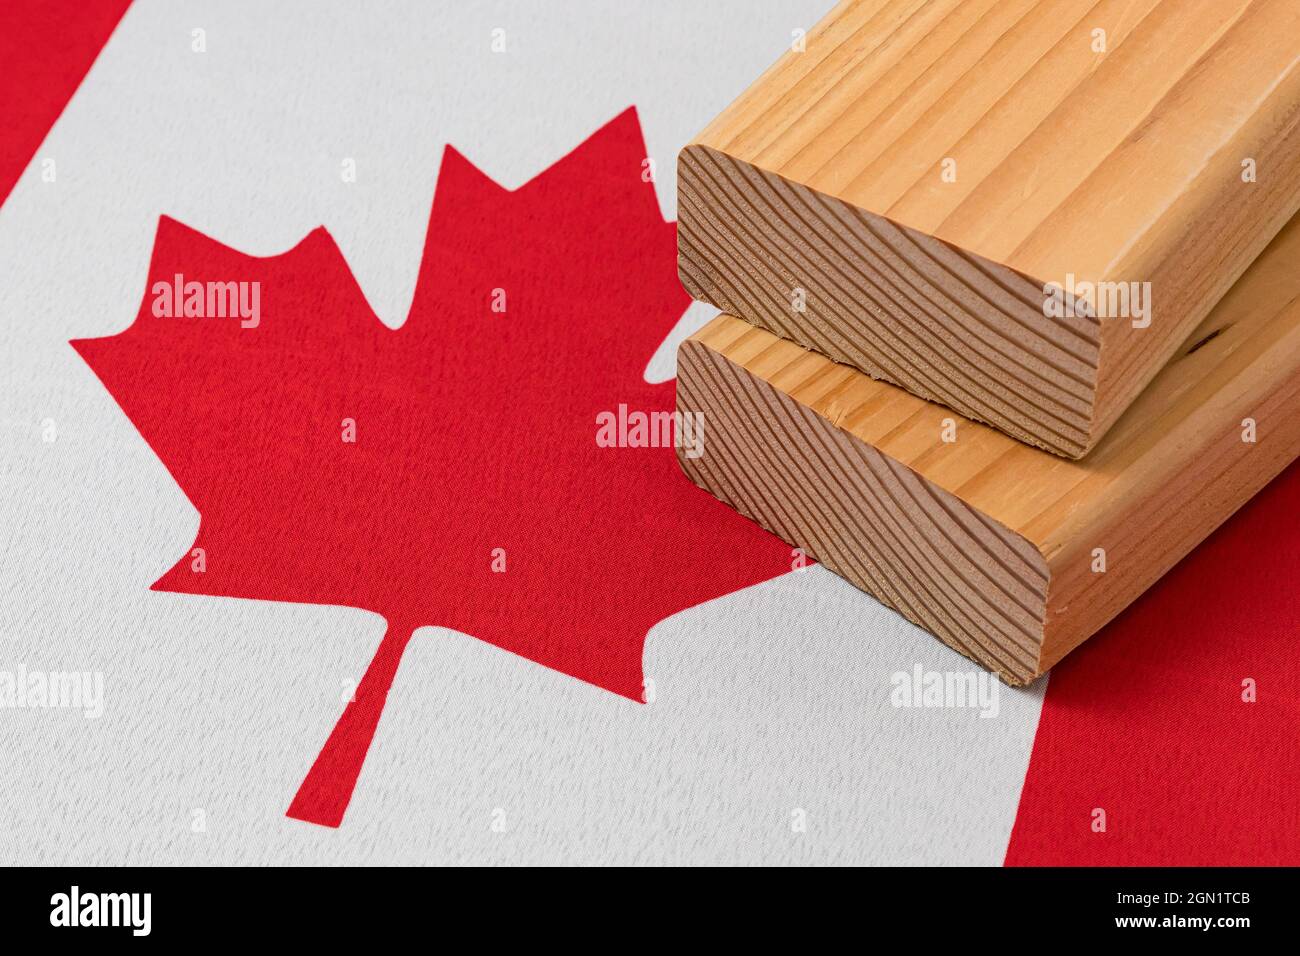 Softwood construction lumber on flag of Canada. Trade war, tariffs, fair trade and lumber, logging industry concept. Stock Photo